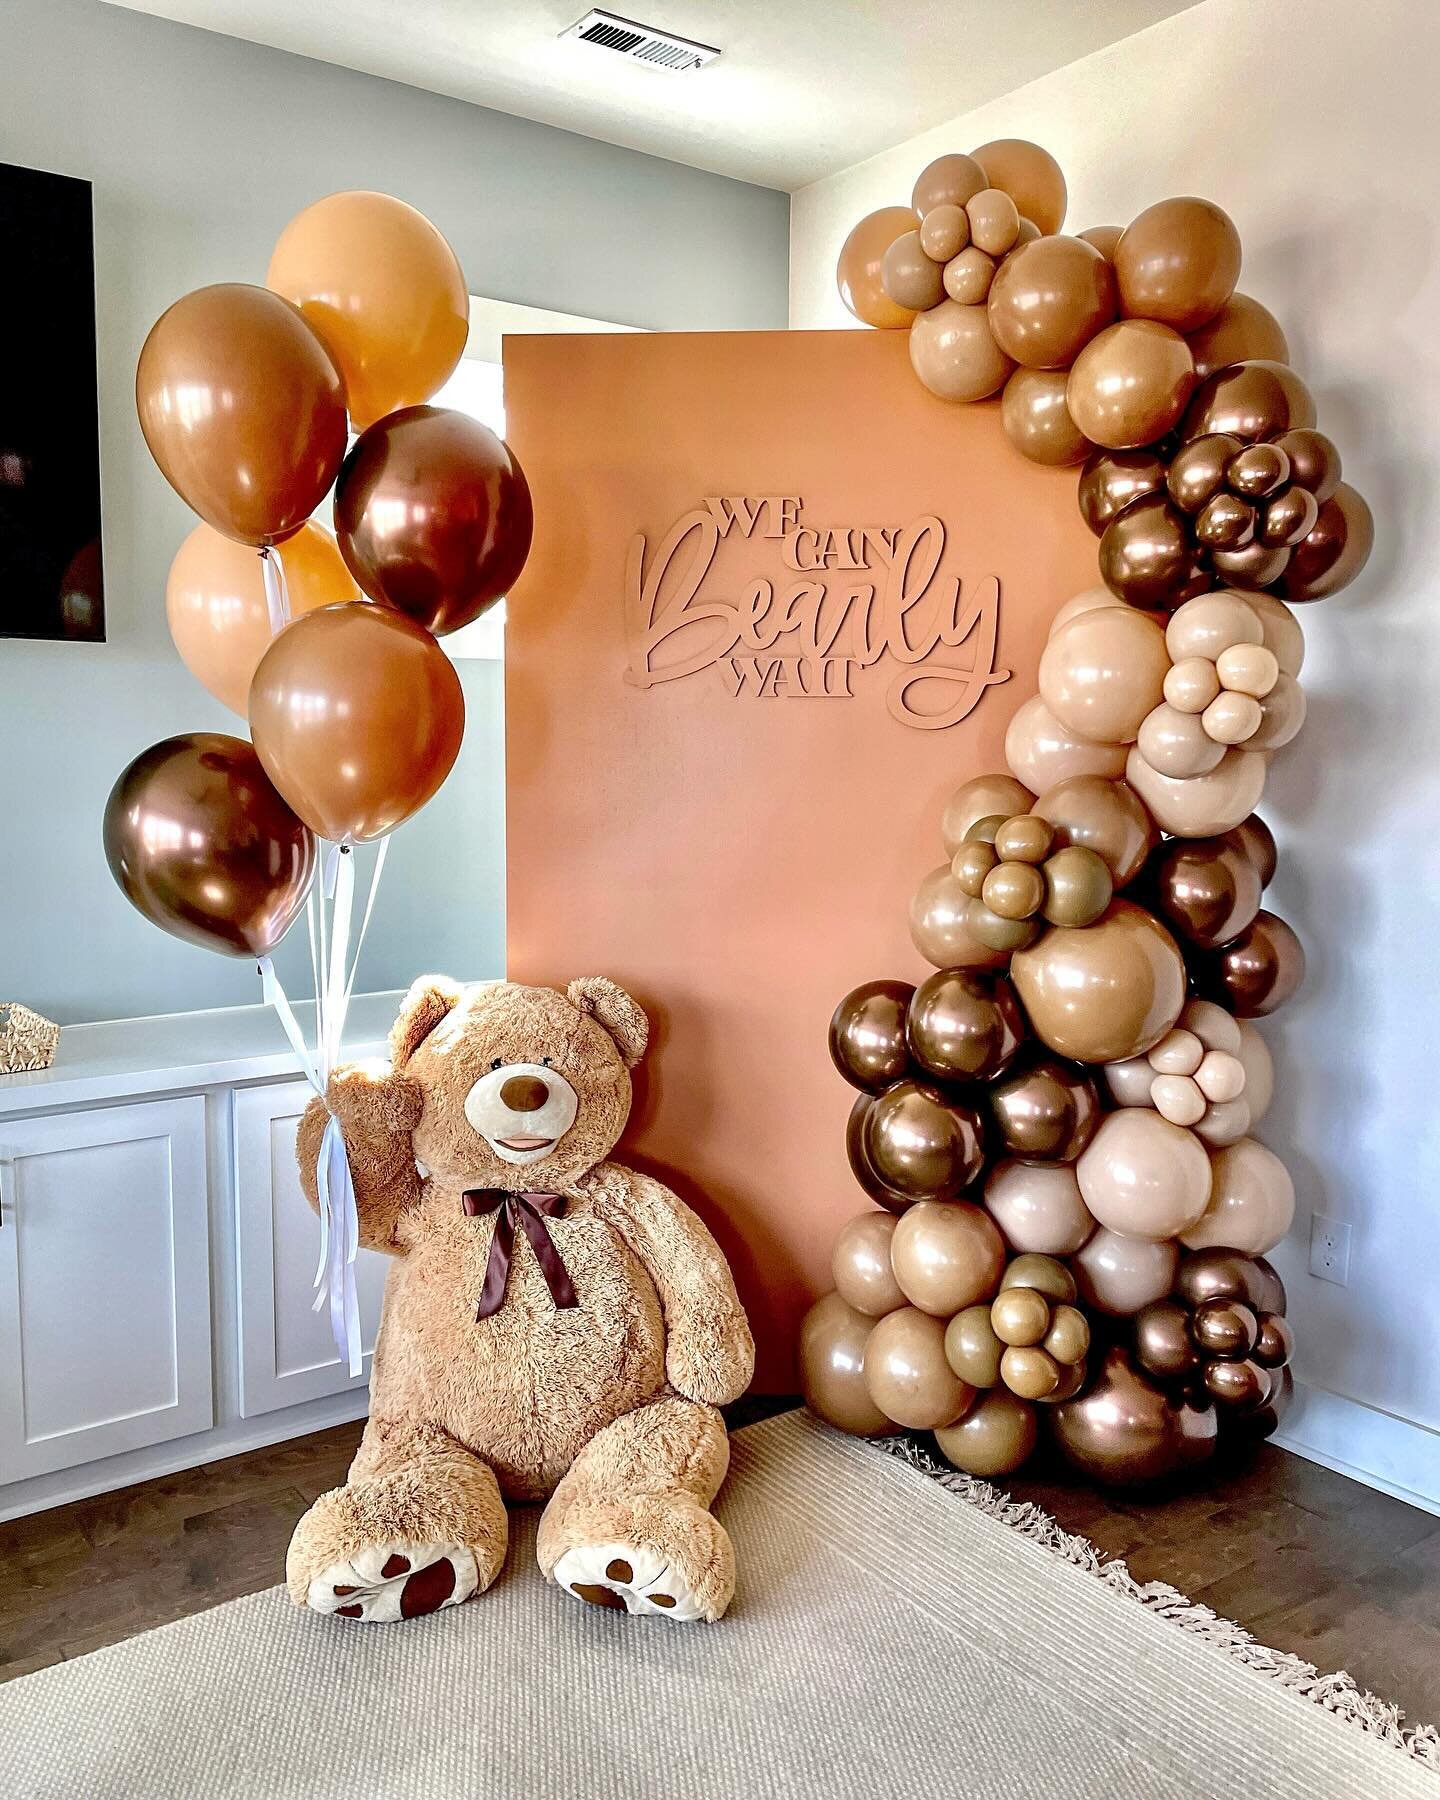 We can {𝘽𝙀𝘼𝙍𝙇𝙔} wait for Emmy Rose&rsquo;s arrival!🐻
&mdash;
We loved this combination of 𝓦𝓮𝓵𝓬𝓸𝓶𝓮 𝓢𝓲𝓰𝓷 and 𝓟𝓱𝓸𝓽𝓸 𝓑𝓪𝓬𝓴𝓭𝓻𝓸𝓹! When planning balloon decor for your event it helps to determine what you want to 𝙝𝙞𝙜𝙝𝙡𝙞𝙜